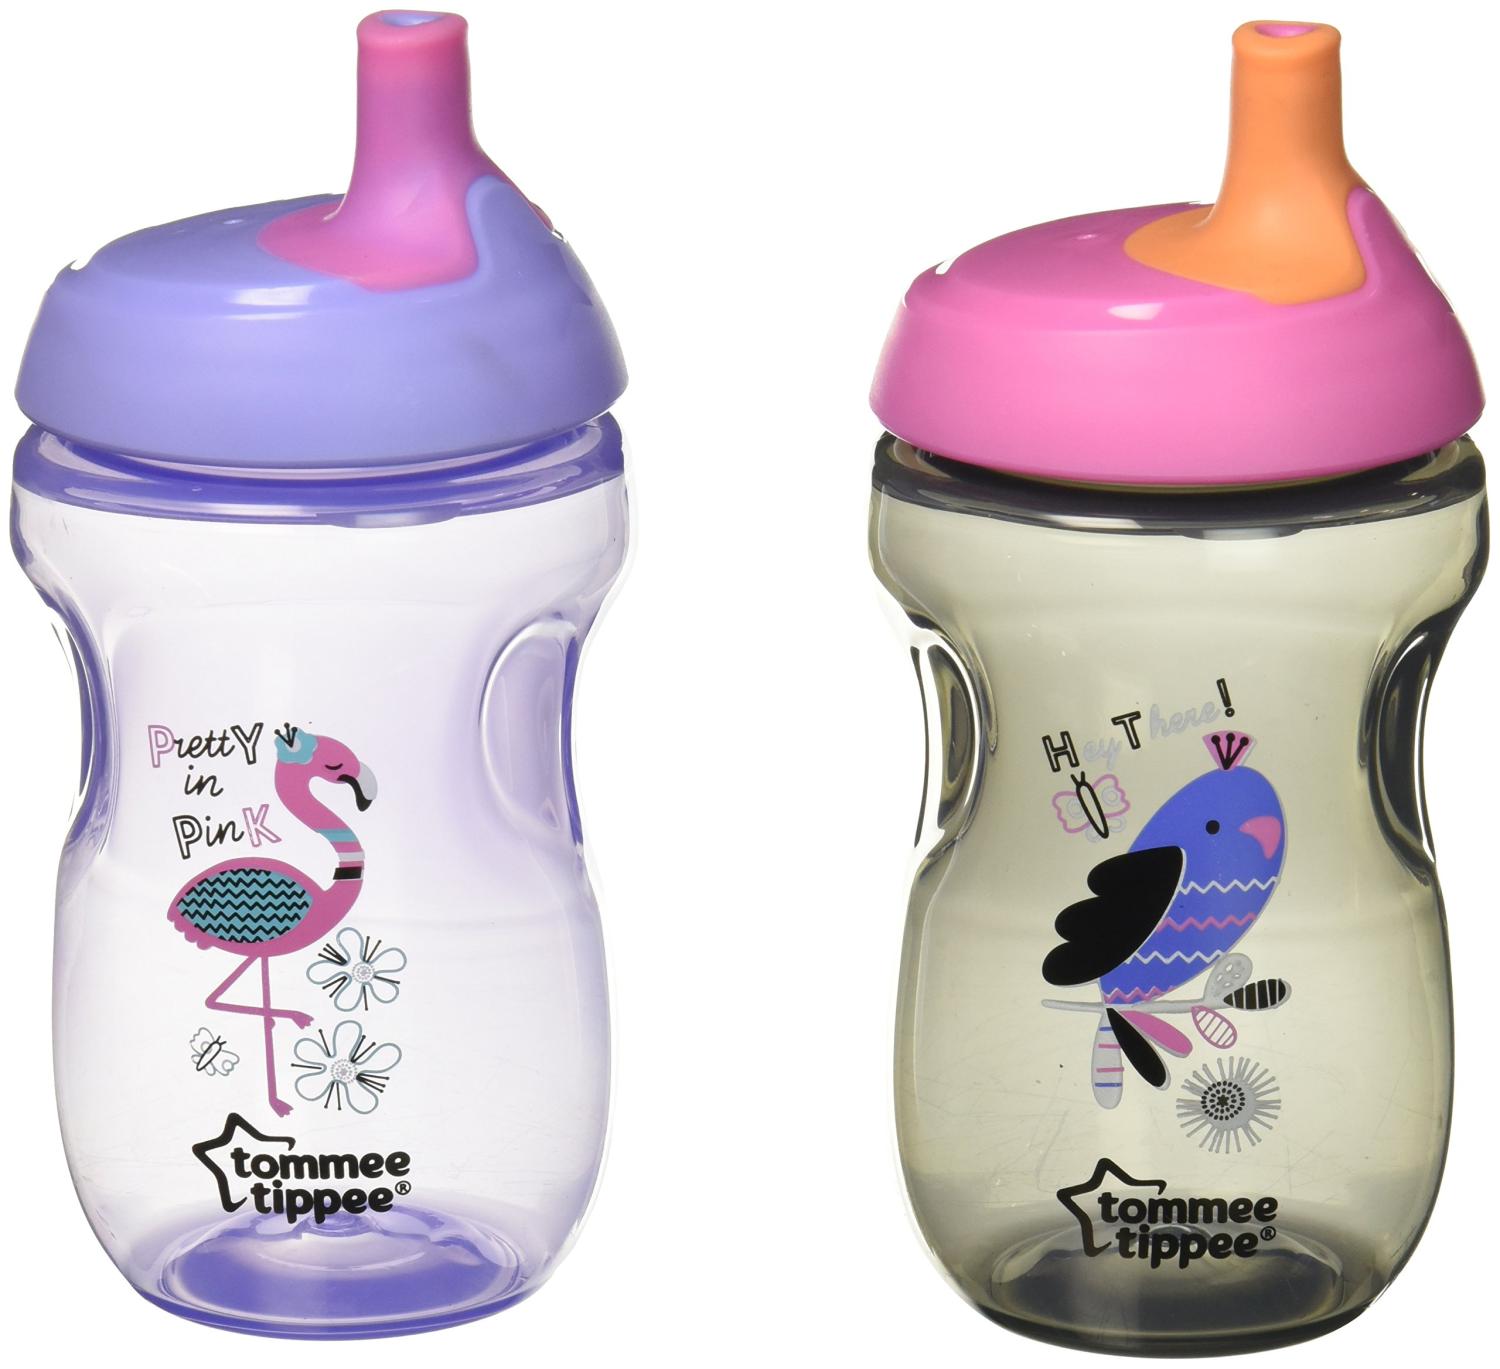 Tommee Tippee Sportee Water Bottle for Toddlers, Spill-Proof, Playful and  Colorful Designs, Easy to …See more Tommee Tippee Sportee Water Bottle for